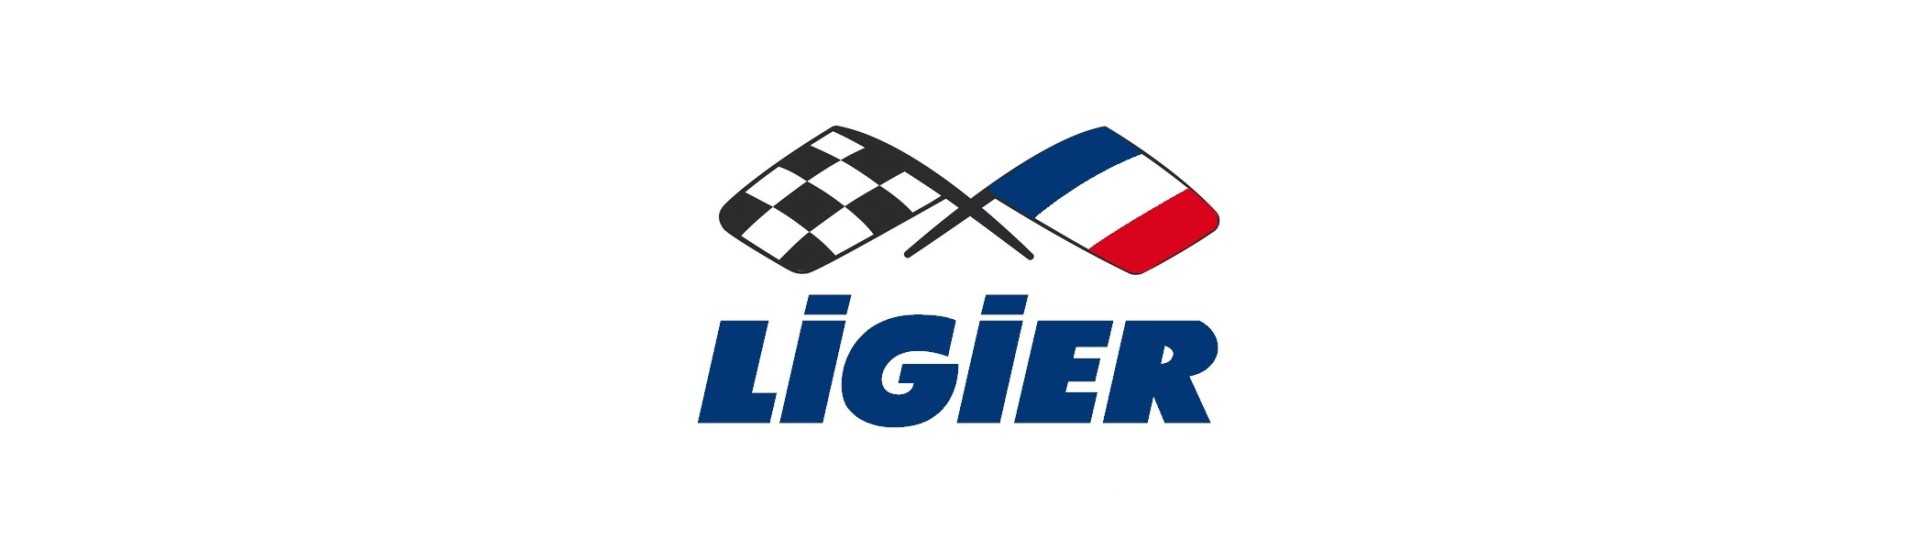 Brake jaw at best price for car without a permit Ligier